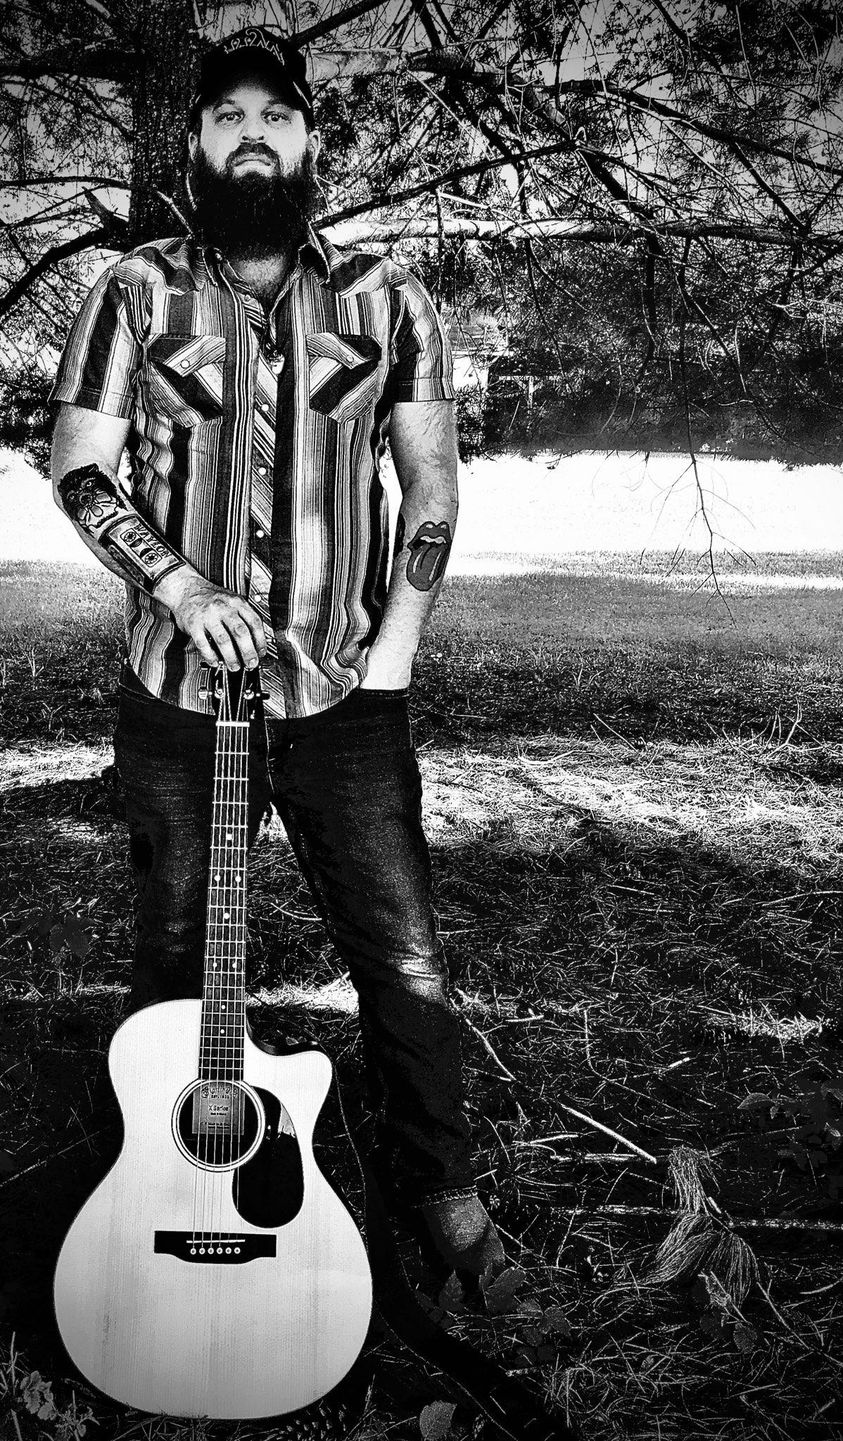 jonny-coller-with-guitar-in-front-of-tree-black-and-white-photo